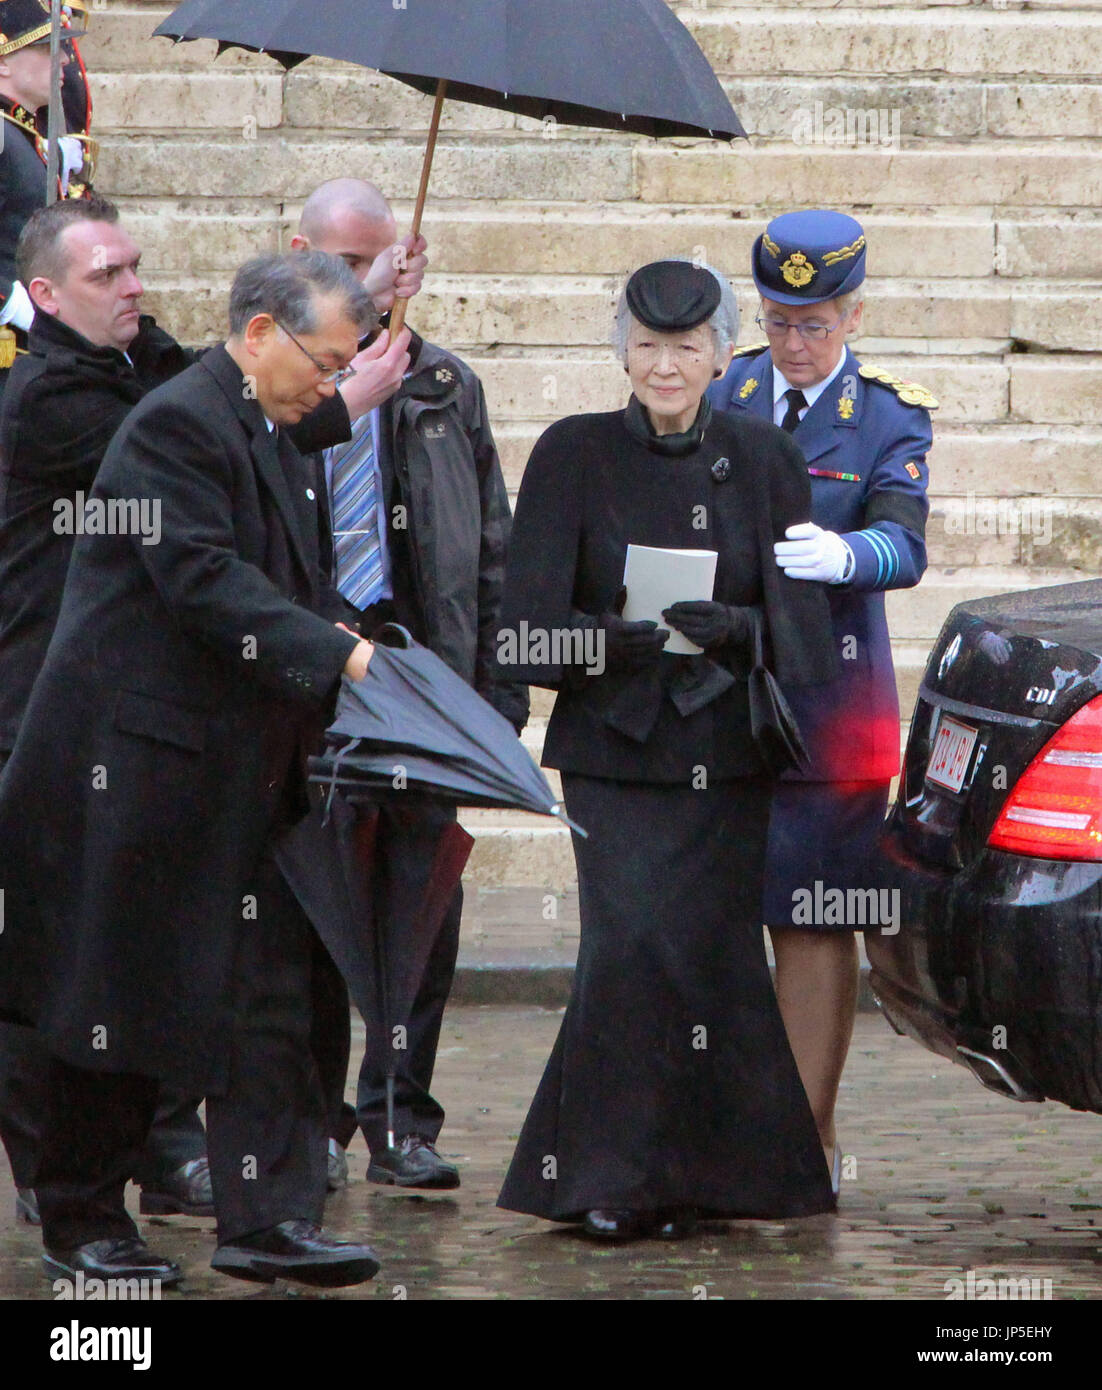 BRUSSELS, Belgium - Photo taken on Dec. 12, 2014, shows Japanese Empress Michiko, who attended a state funeral in Brussels for Belgian Dowager Queen Fabiola. Emperor Akihito and Empress Michiko developed a close friendship with the late King Baudouin and Queen Fabiola, and the Japanese imperial couple attended a funeral for the king when he died in 1993. (Kyodo) Stock Photo